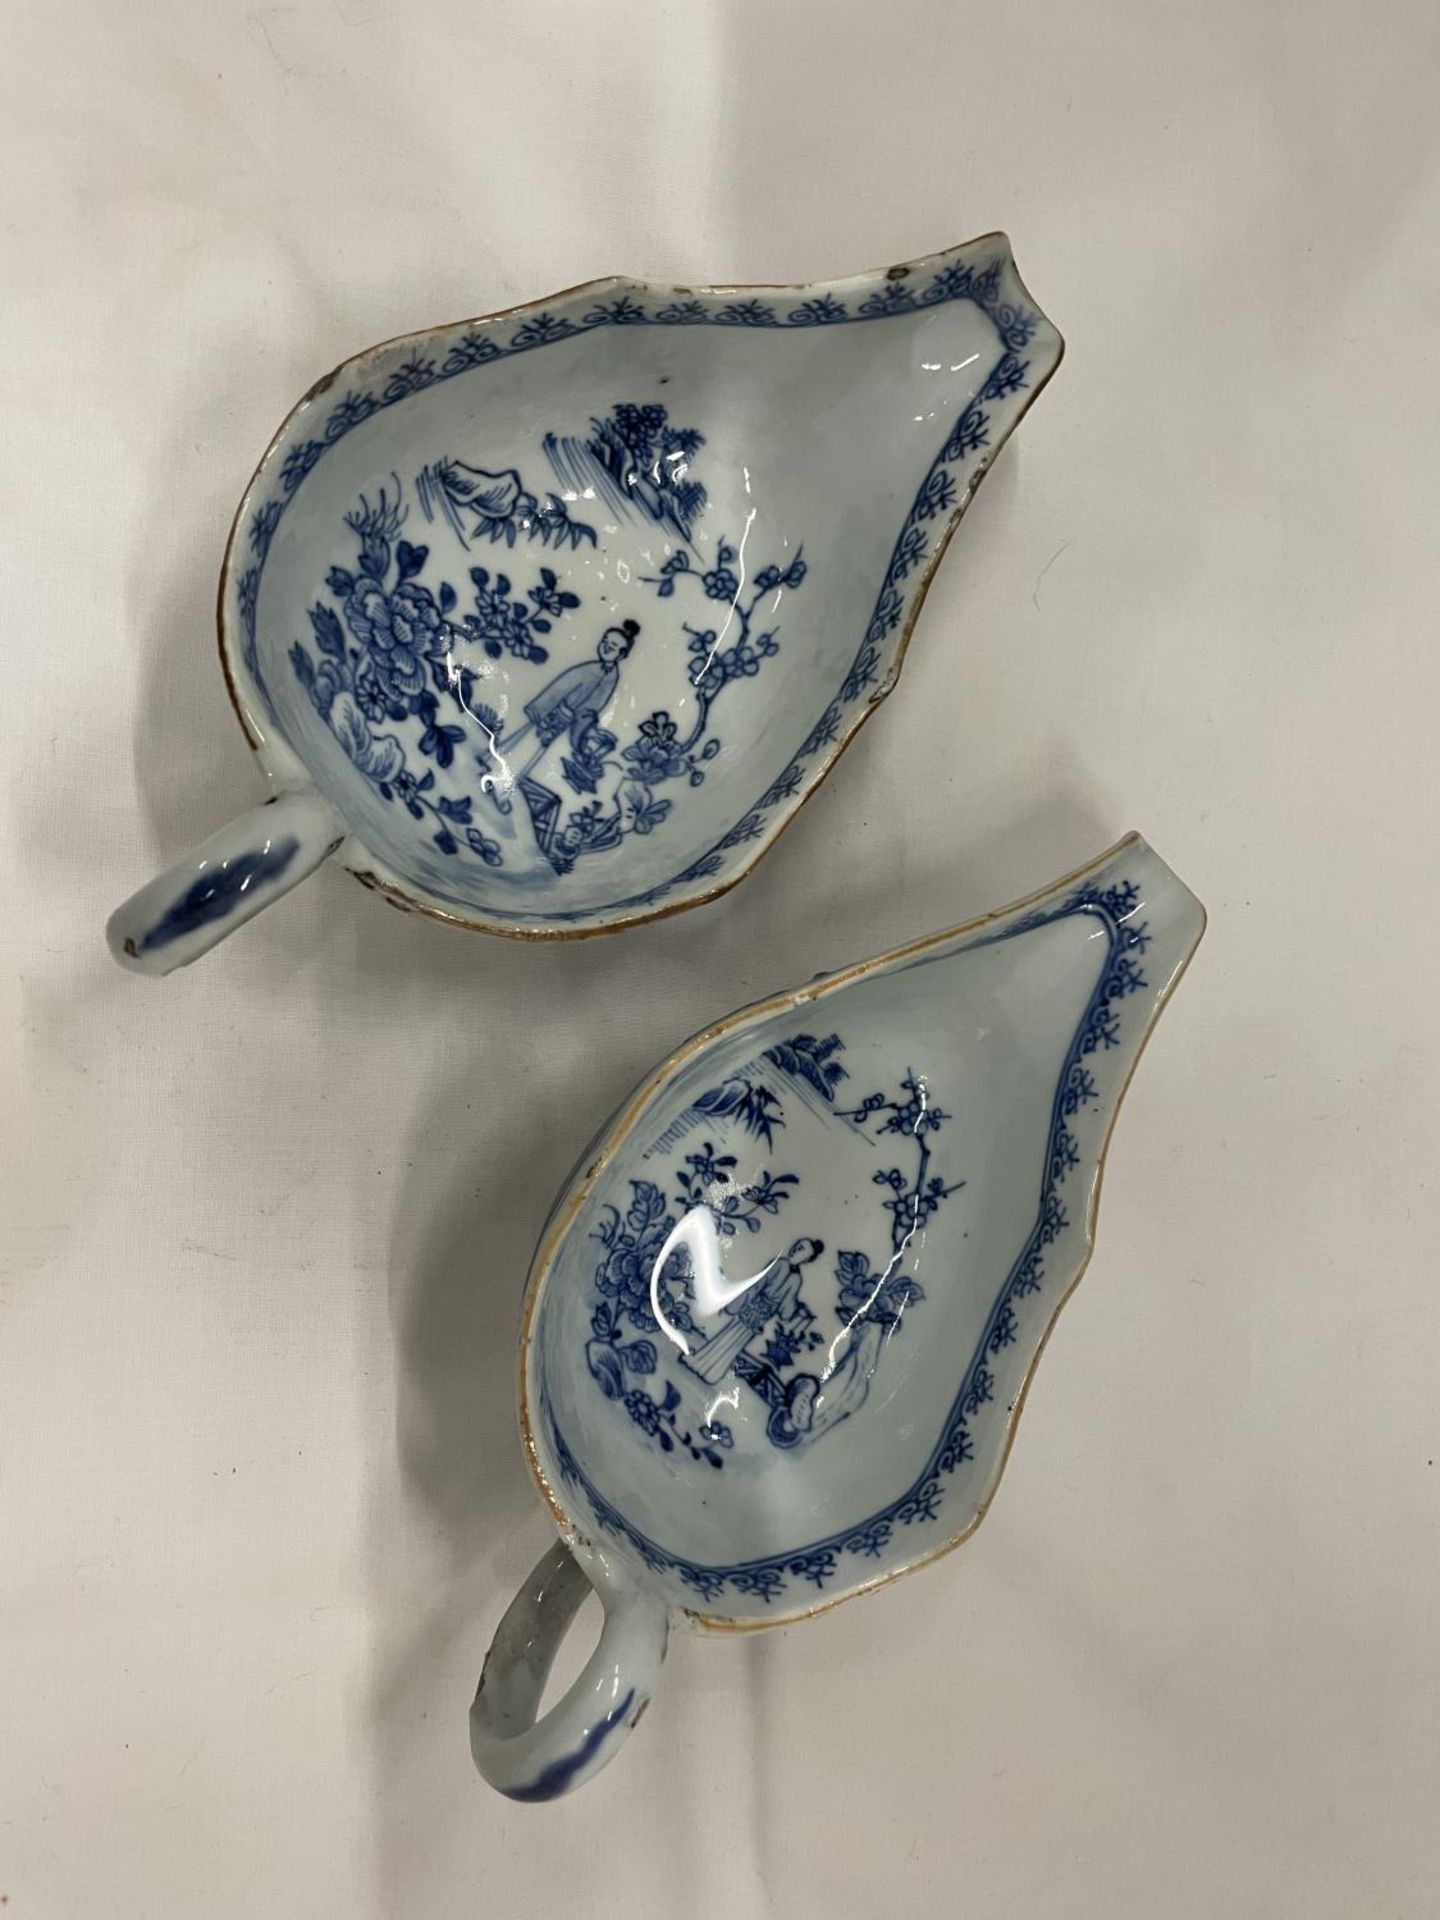 A BELIEVED TO BE LATE 18TH/EARLY 19TH CENTURY CHINESE QING DYNASTY/NANKIN BLUE AND WHITE SAUCE - Image 2 of 8